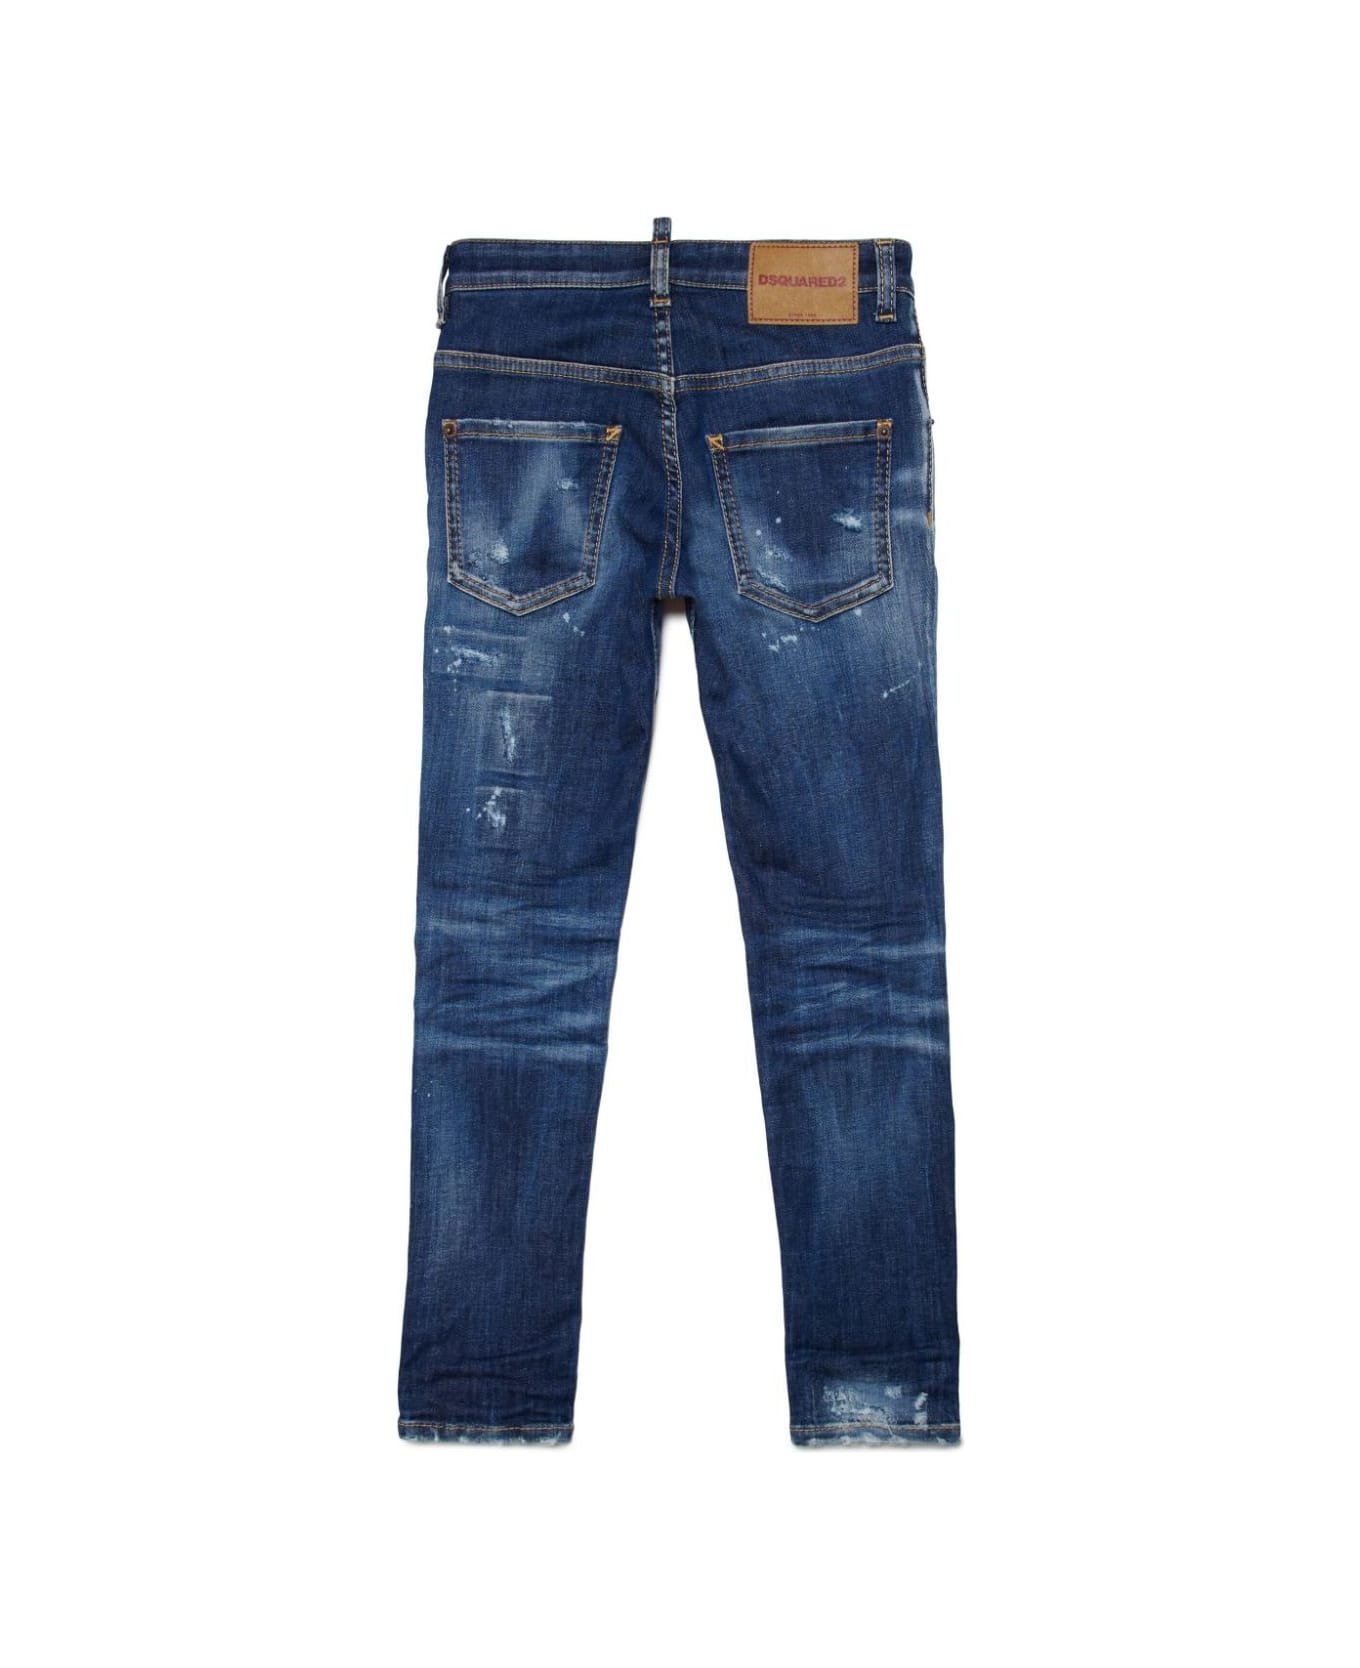 Dsquared2 Skater Skinny Jeans In Dark Blue Washed With Rips - Blue